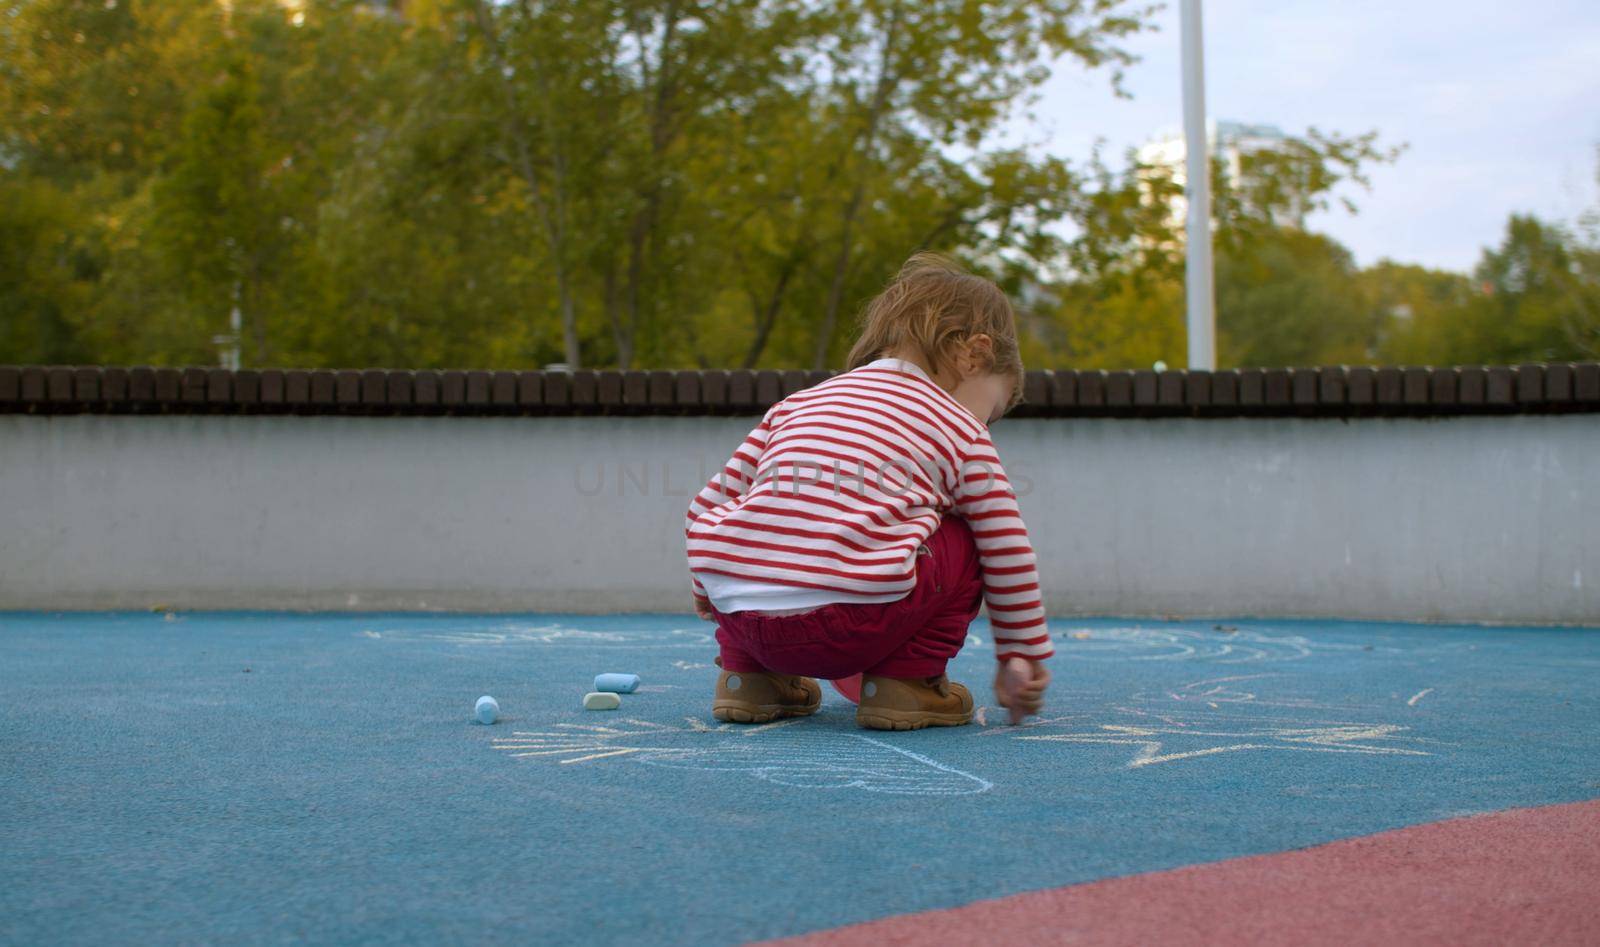 Small girl chalking on the playground in the park. Children's development concept